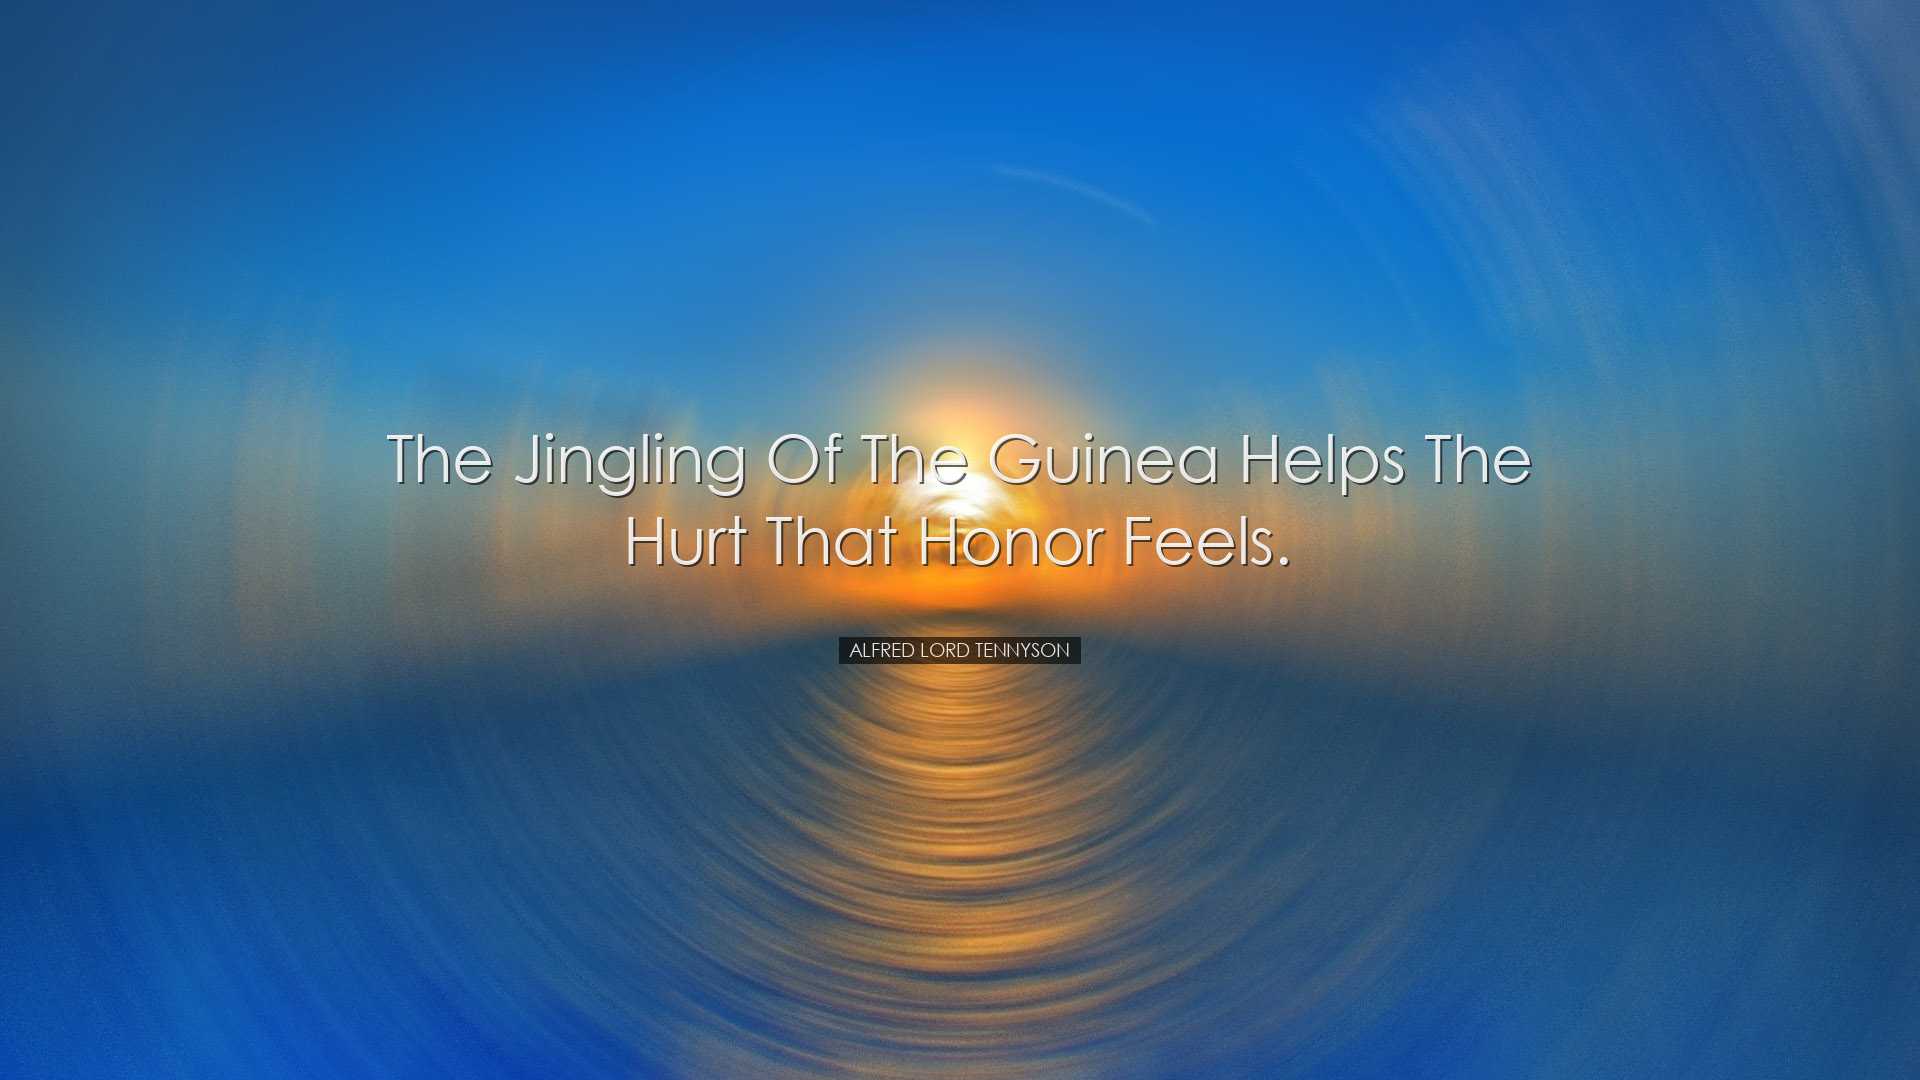 The jingling of the guinea helps the hurt that Honor feels. - Alfr